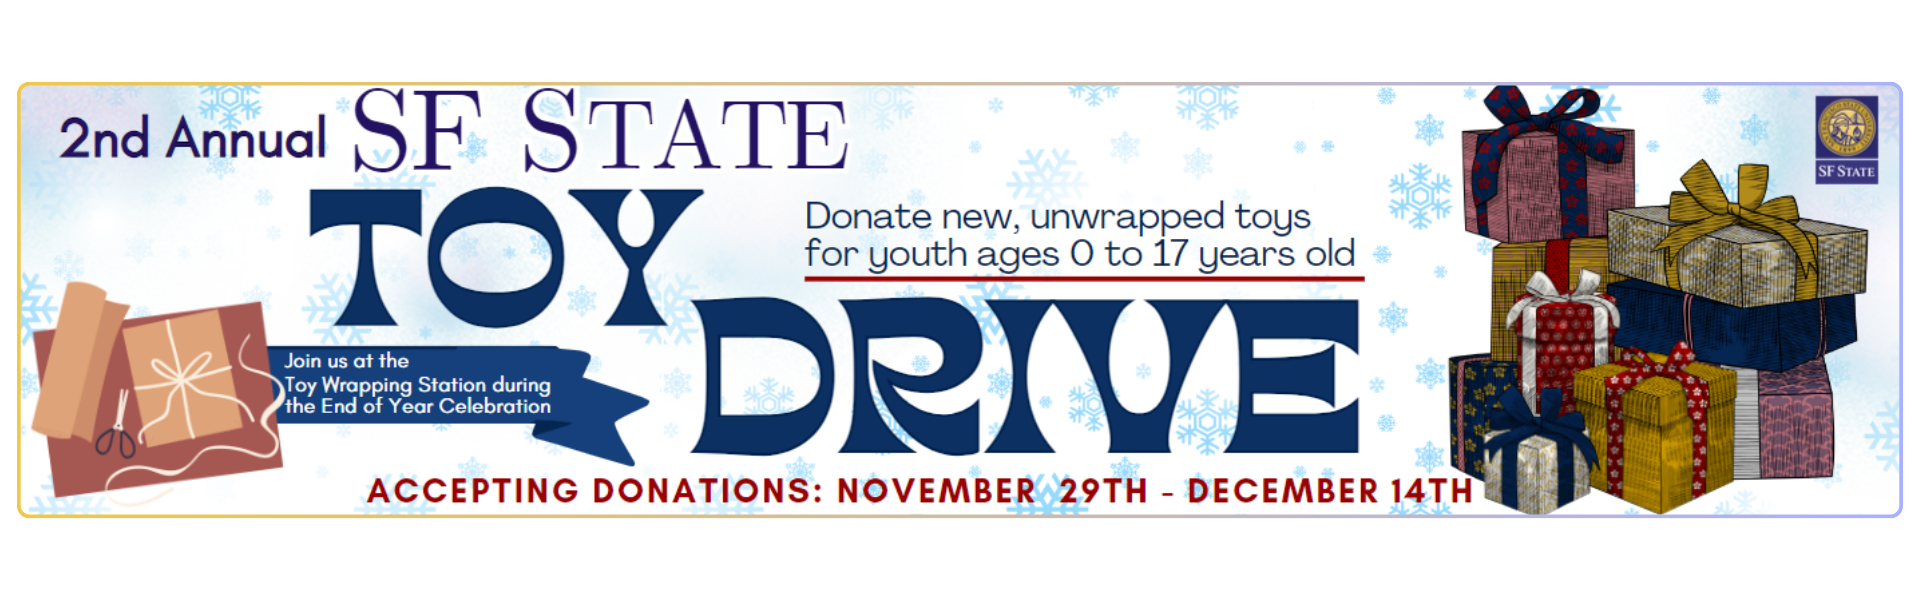 2024 Toy Drive Banner w/ Serif SF State font